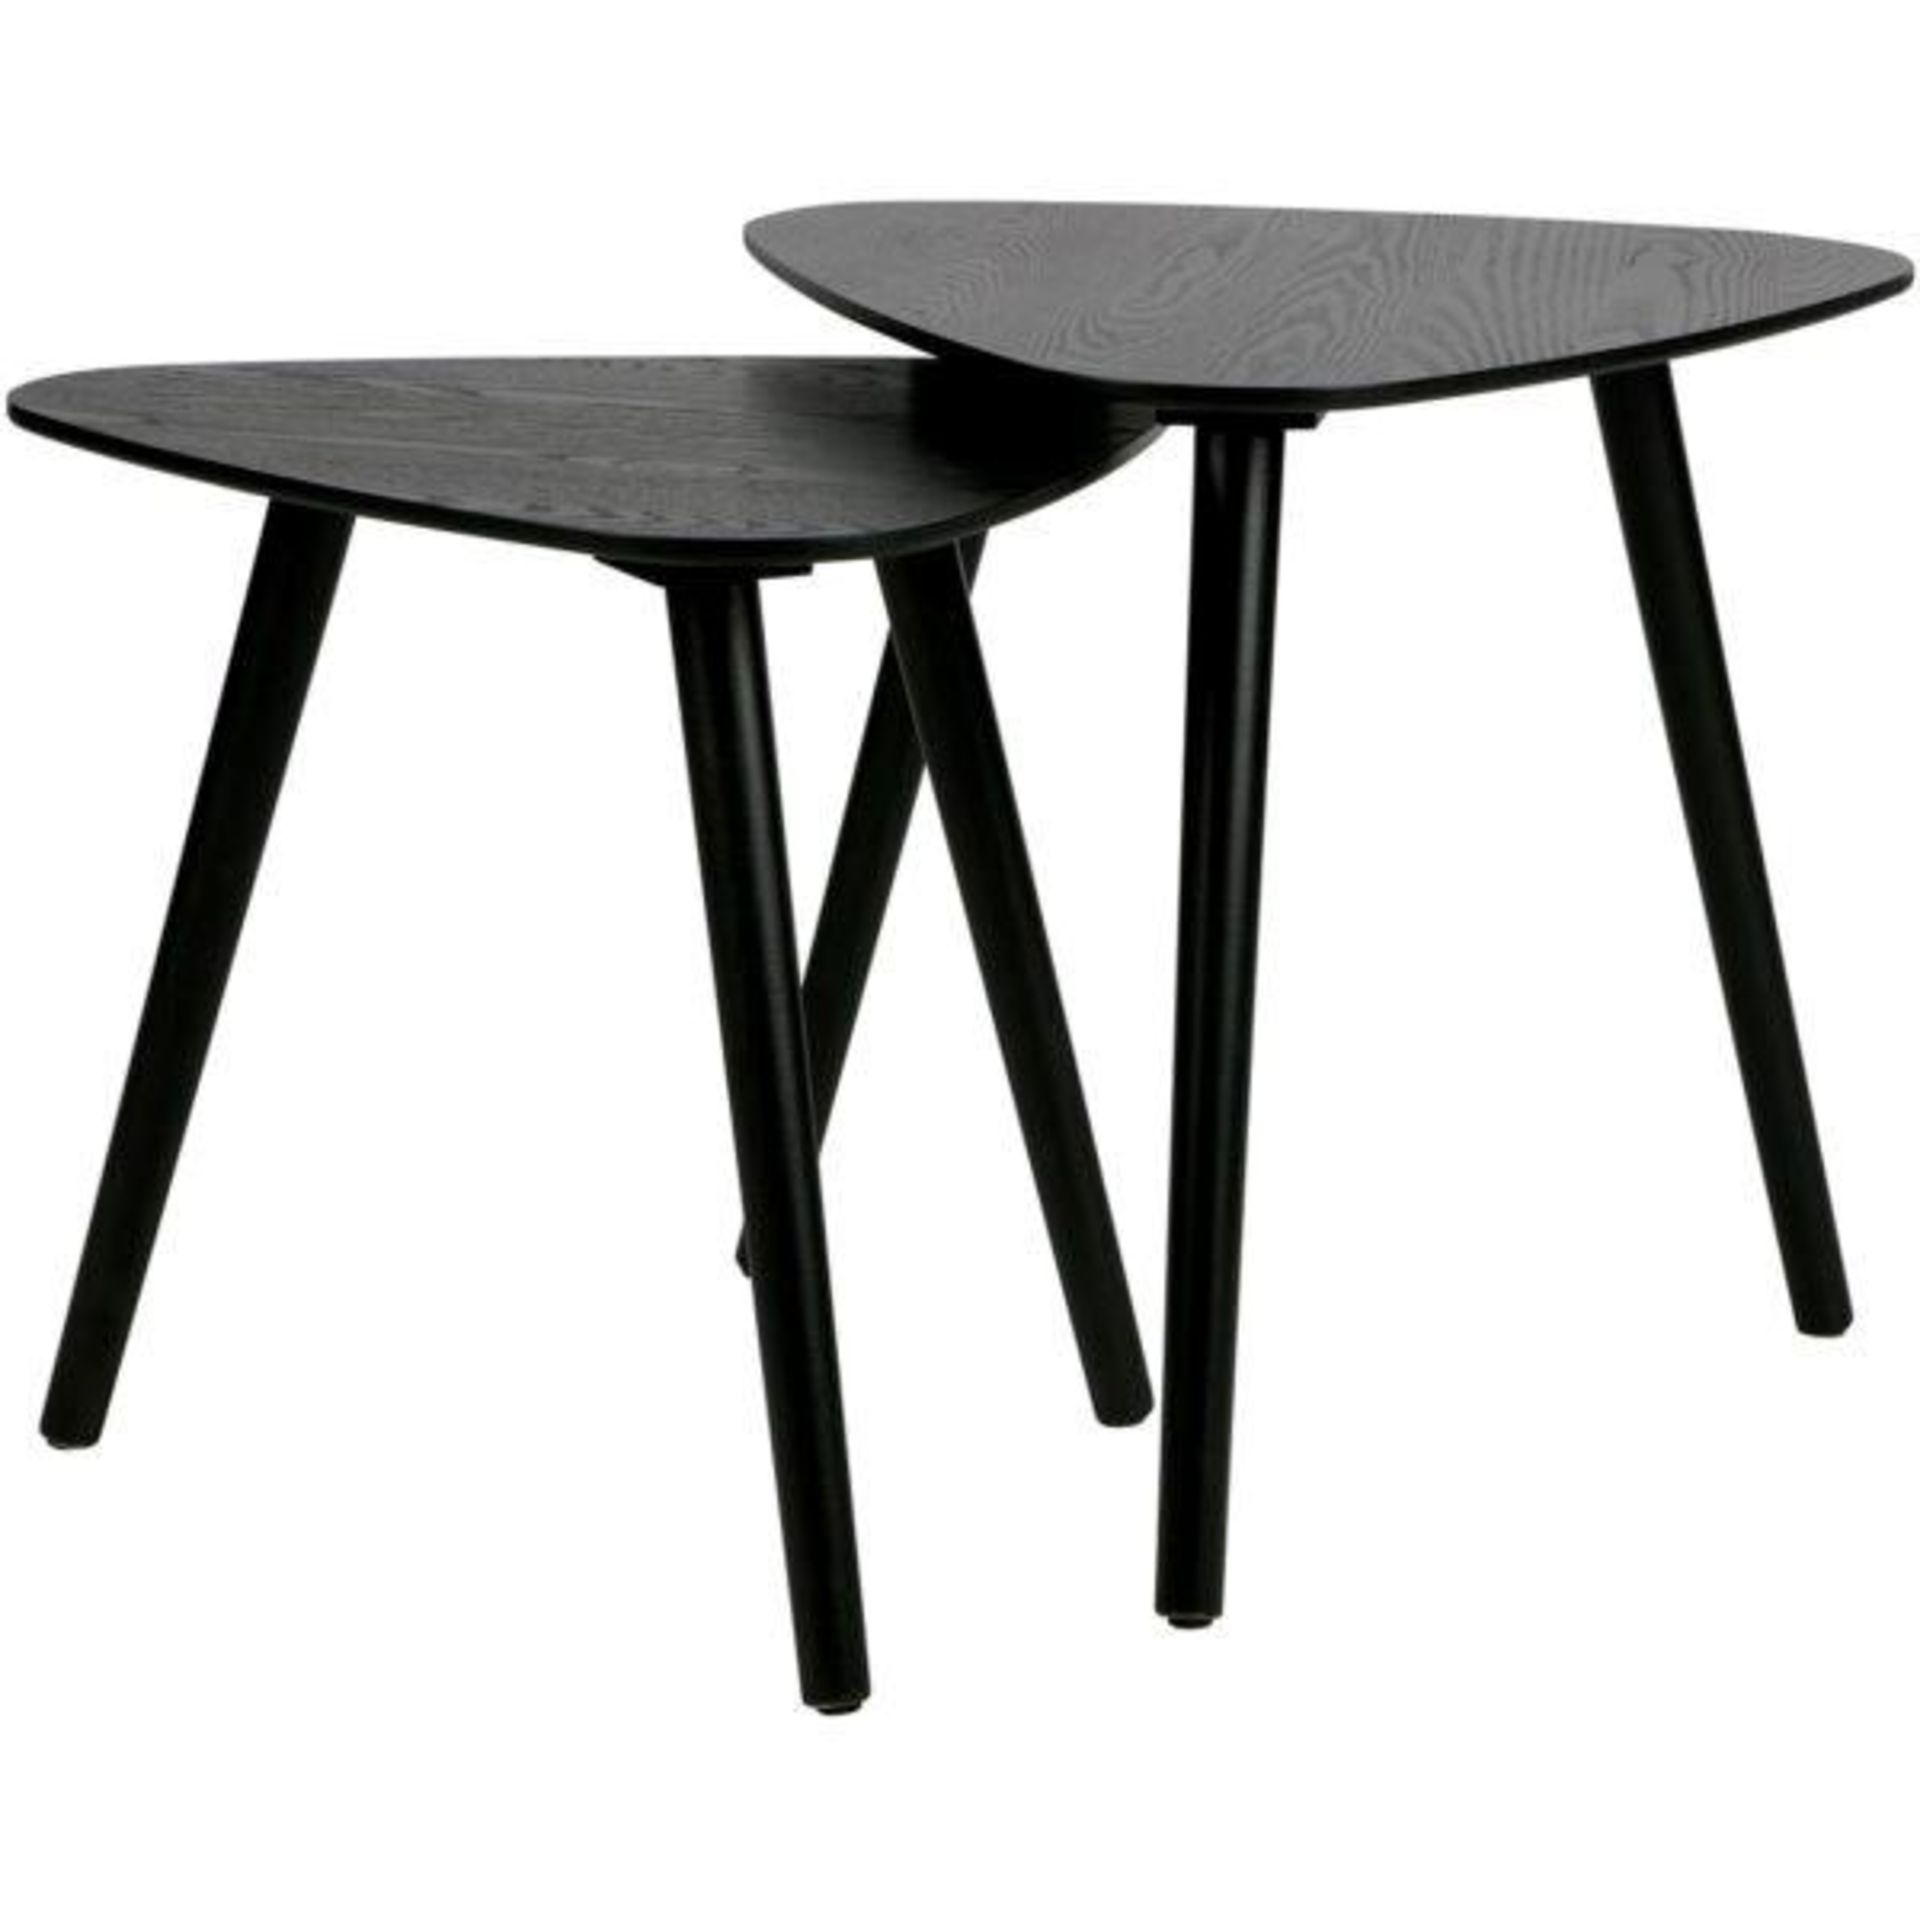 Set Of 2 x NILA Contemporary Wooden Side Tables In BLACK - Made By Woood - Brand New Boxed Stock - C - Image 4 of 6